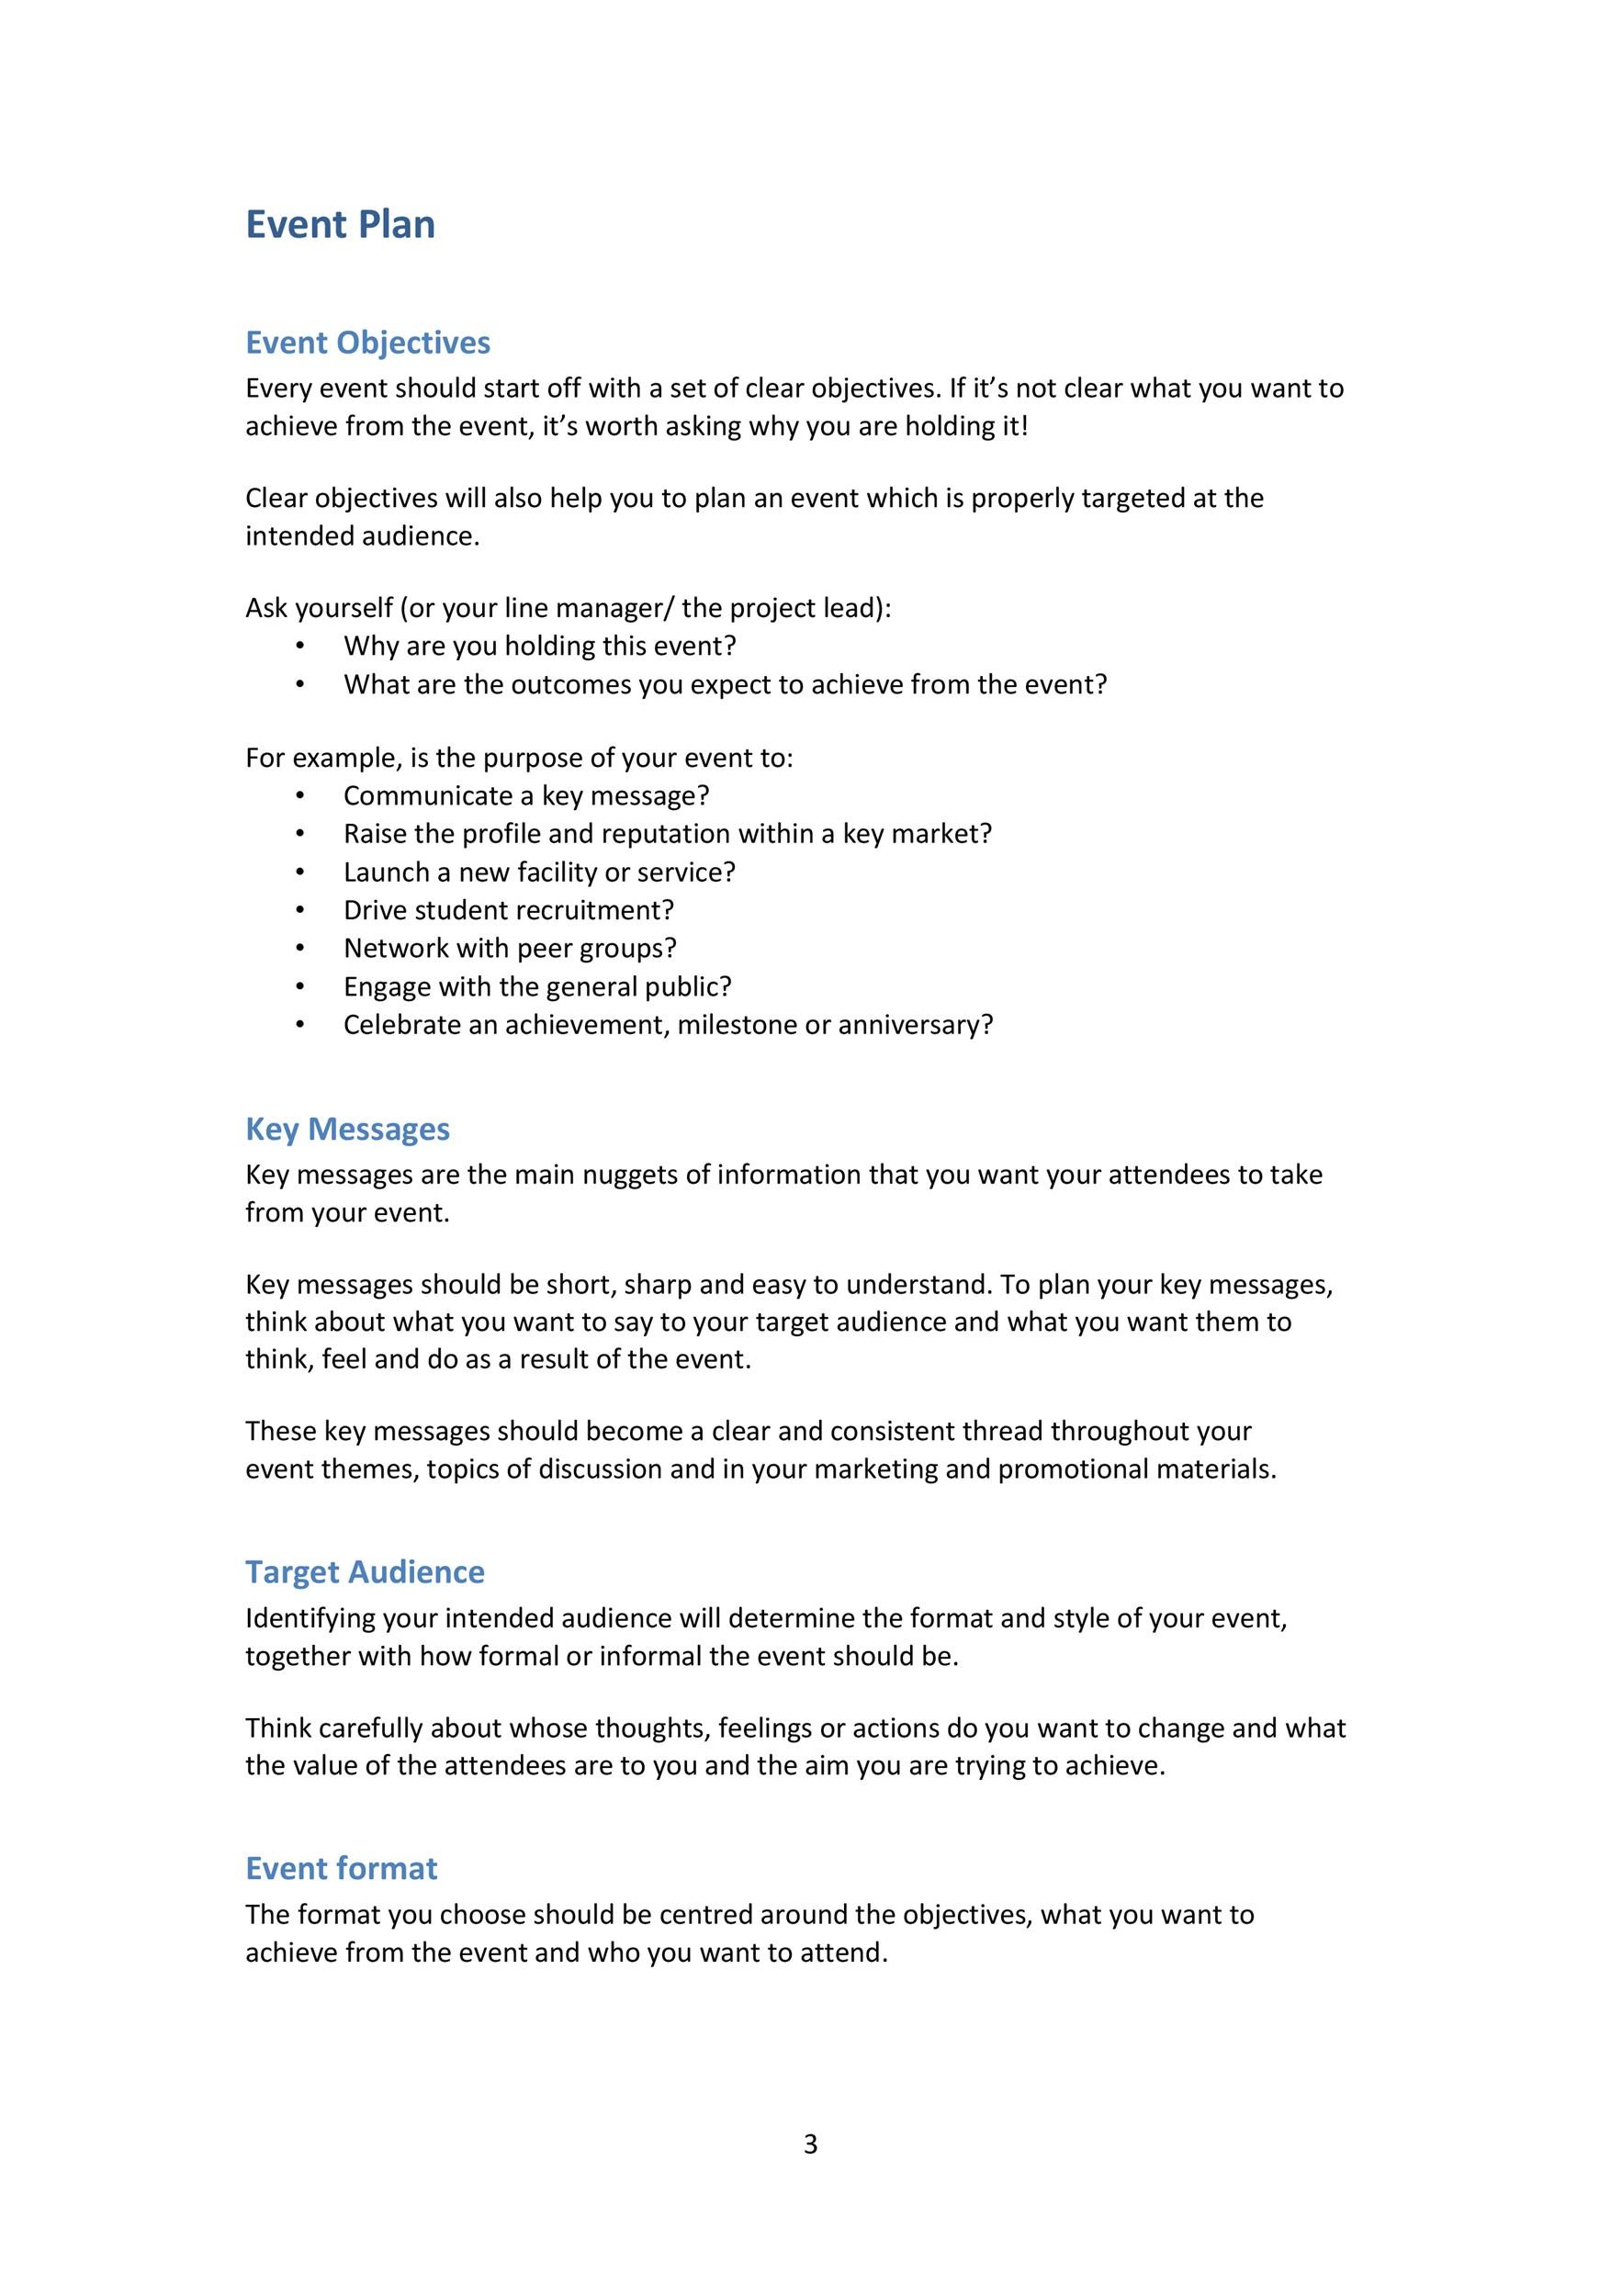 Event Planning Questionnaire Template from templatelab.com